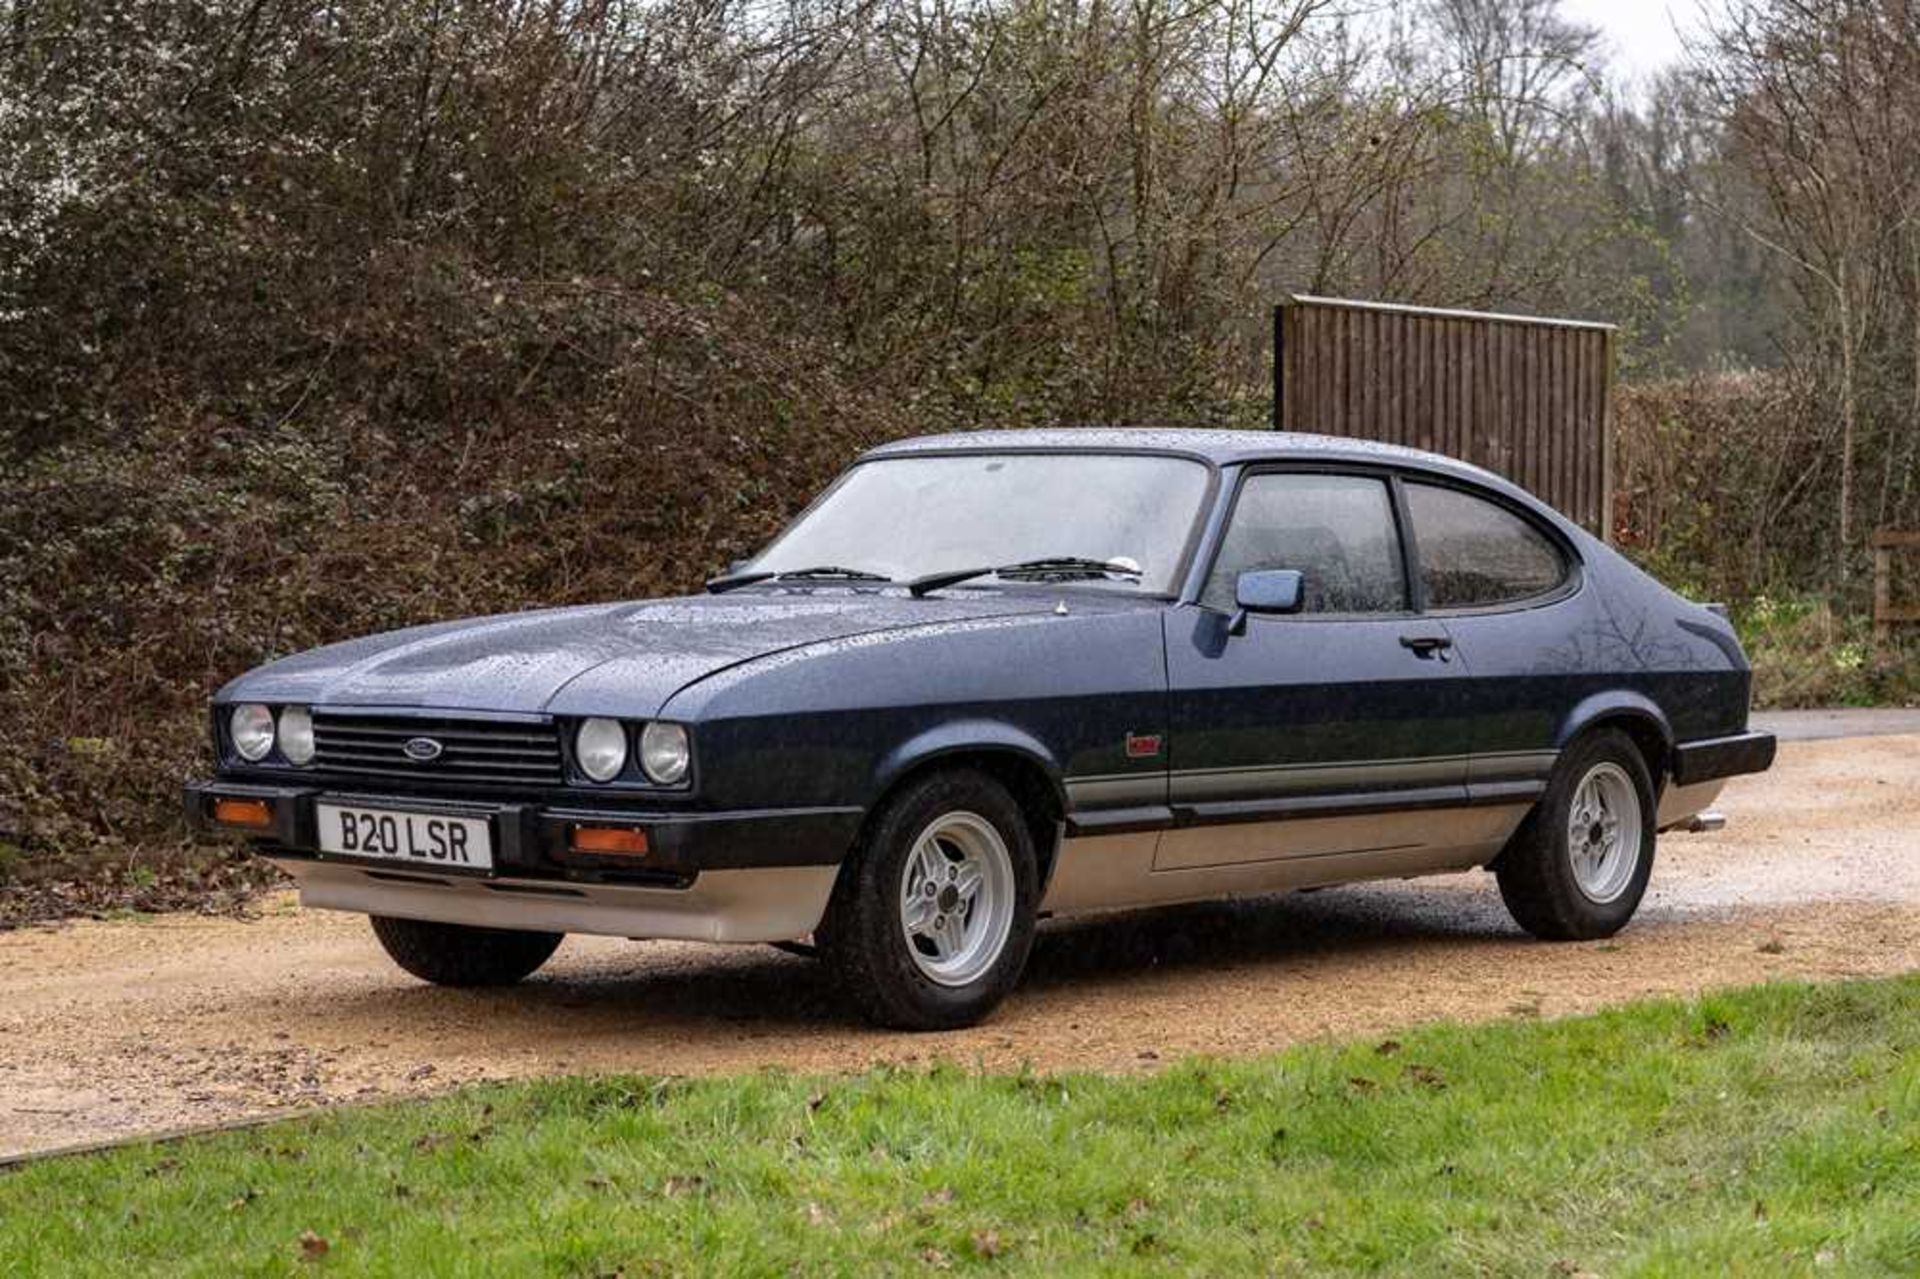 1985 Ford Capri Laser 2.0 Litre Warranted 55,300 miles from new - Image 65 of 67